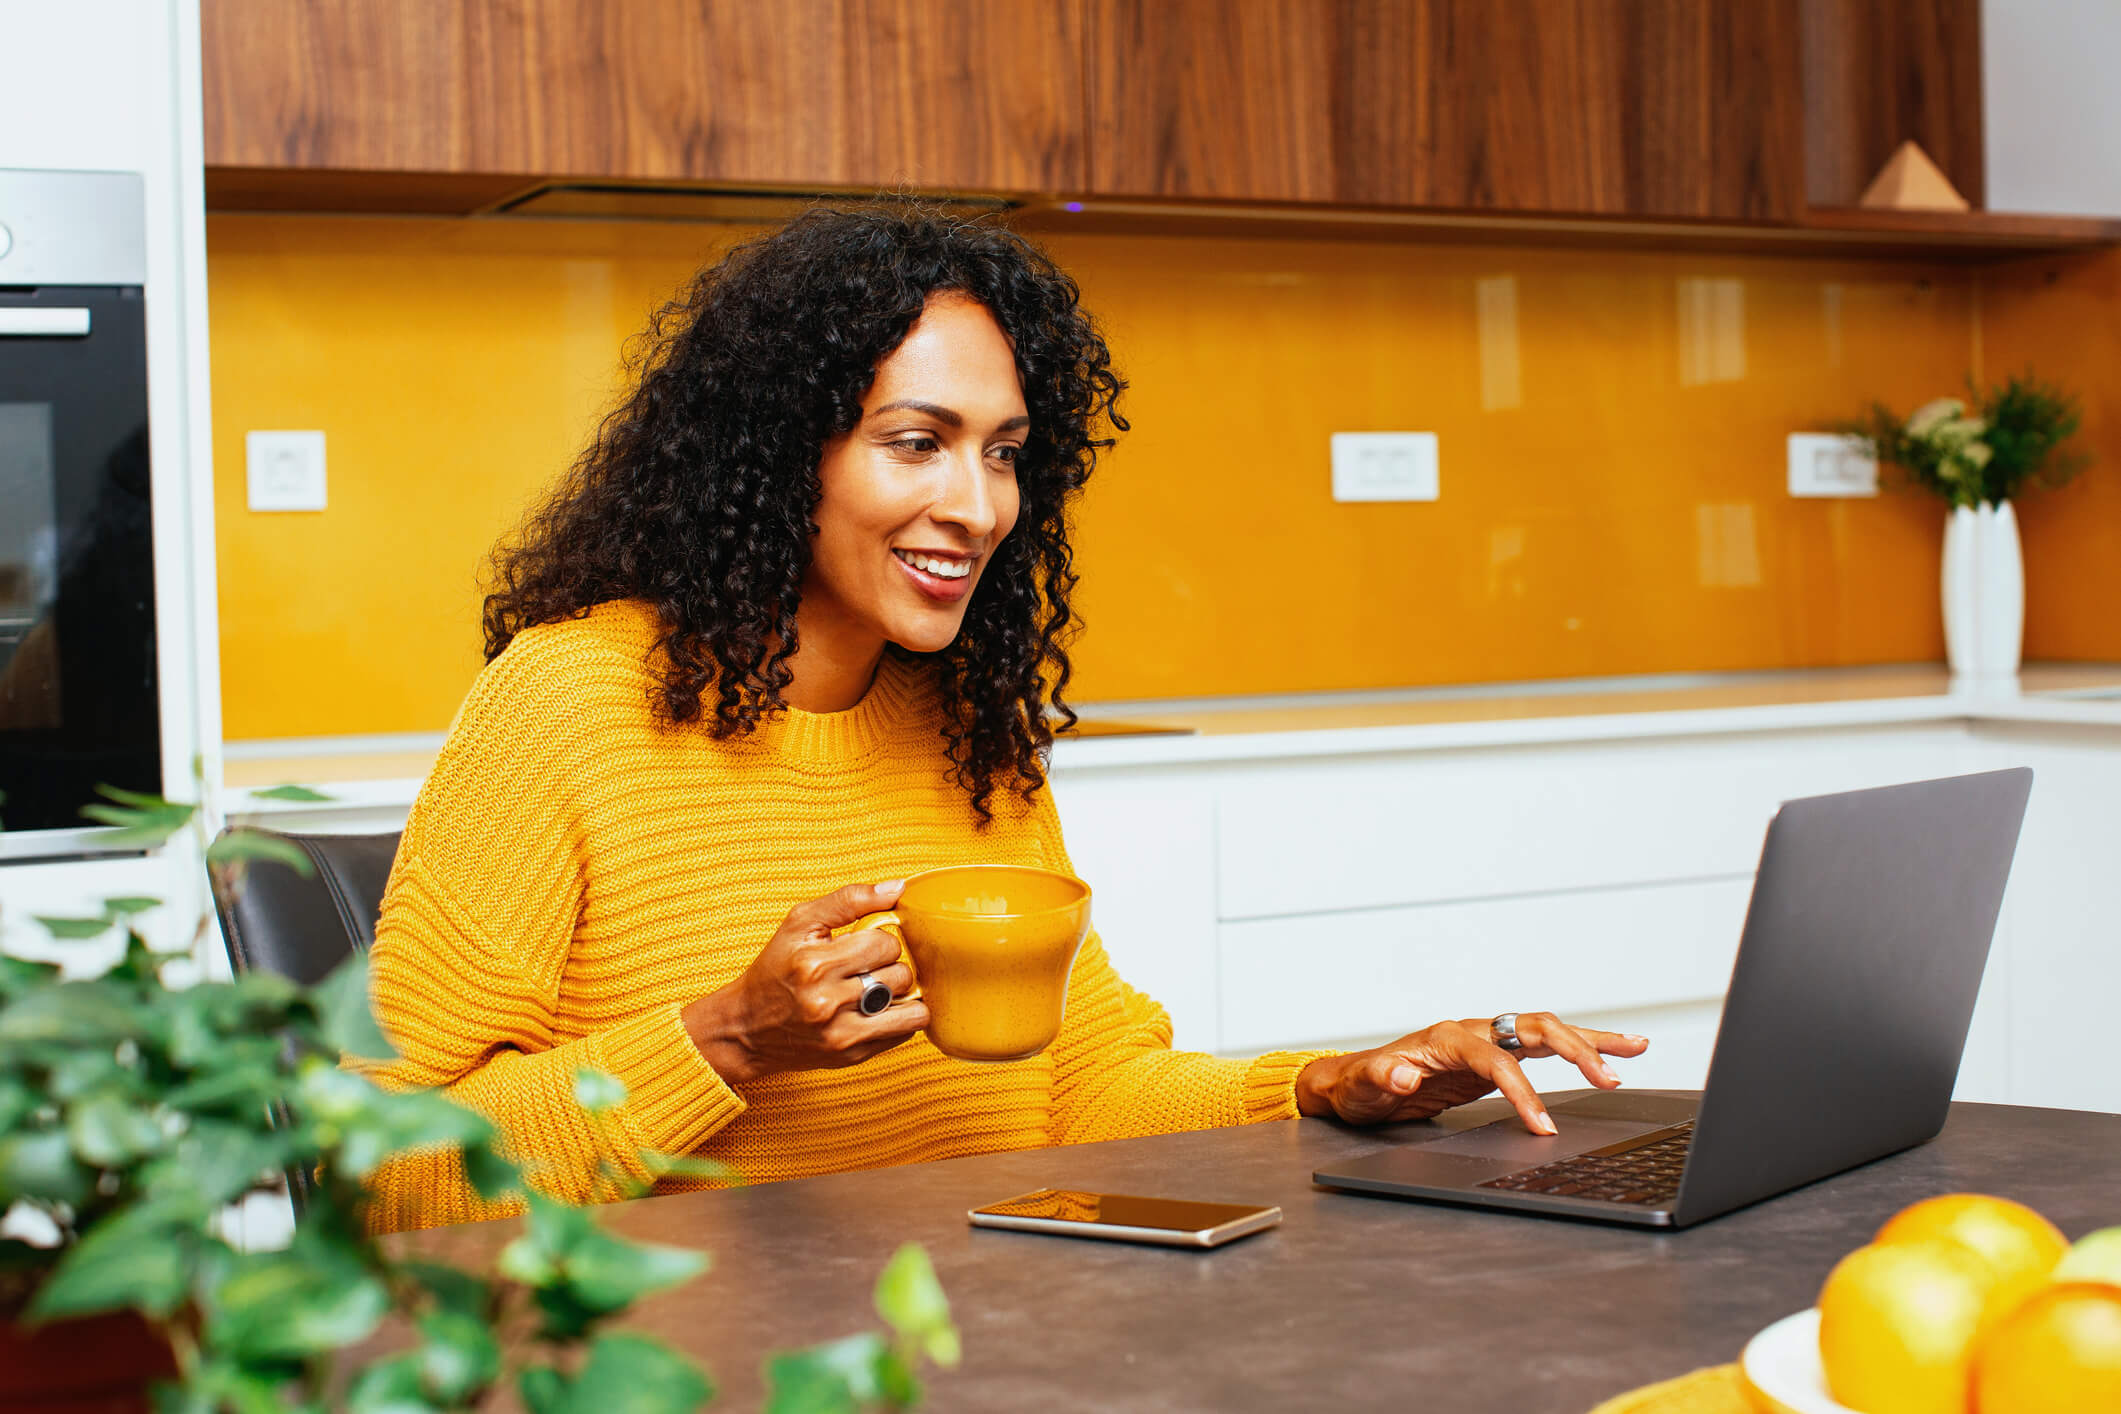 Woman with dark curly hair using computer to see what loans she qualifies for in her stylish kitchen with walls that match her yellow jumper